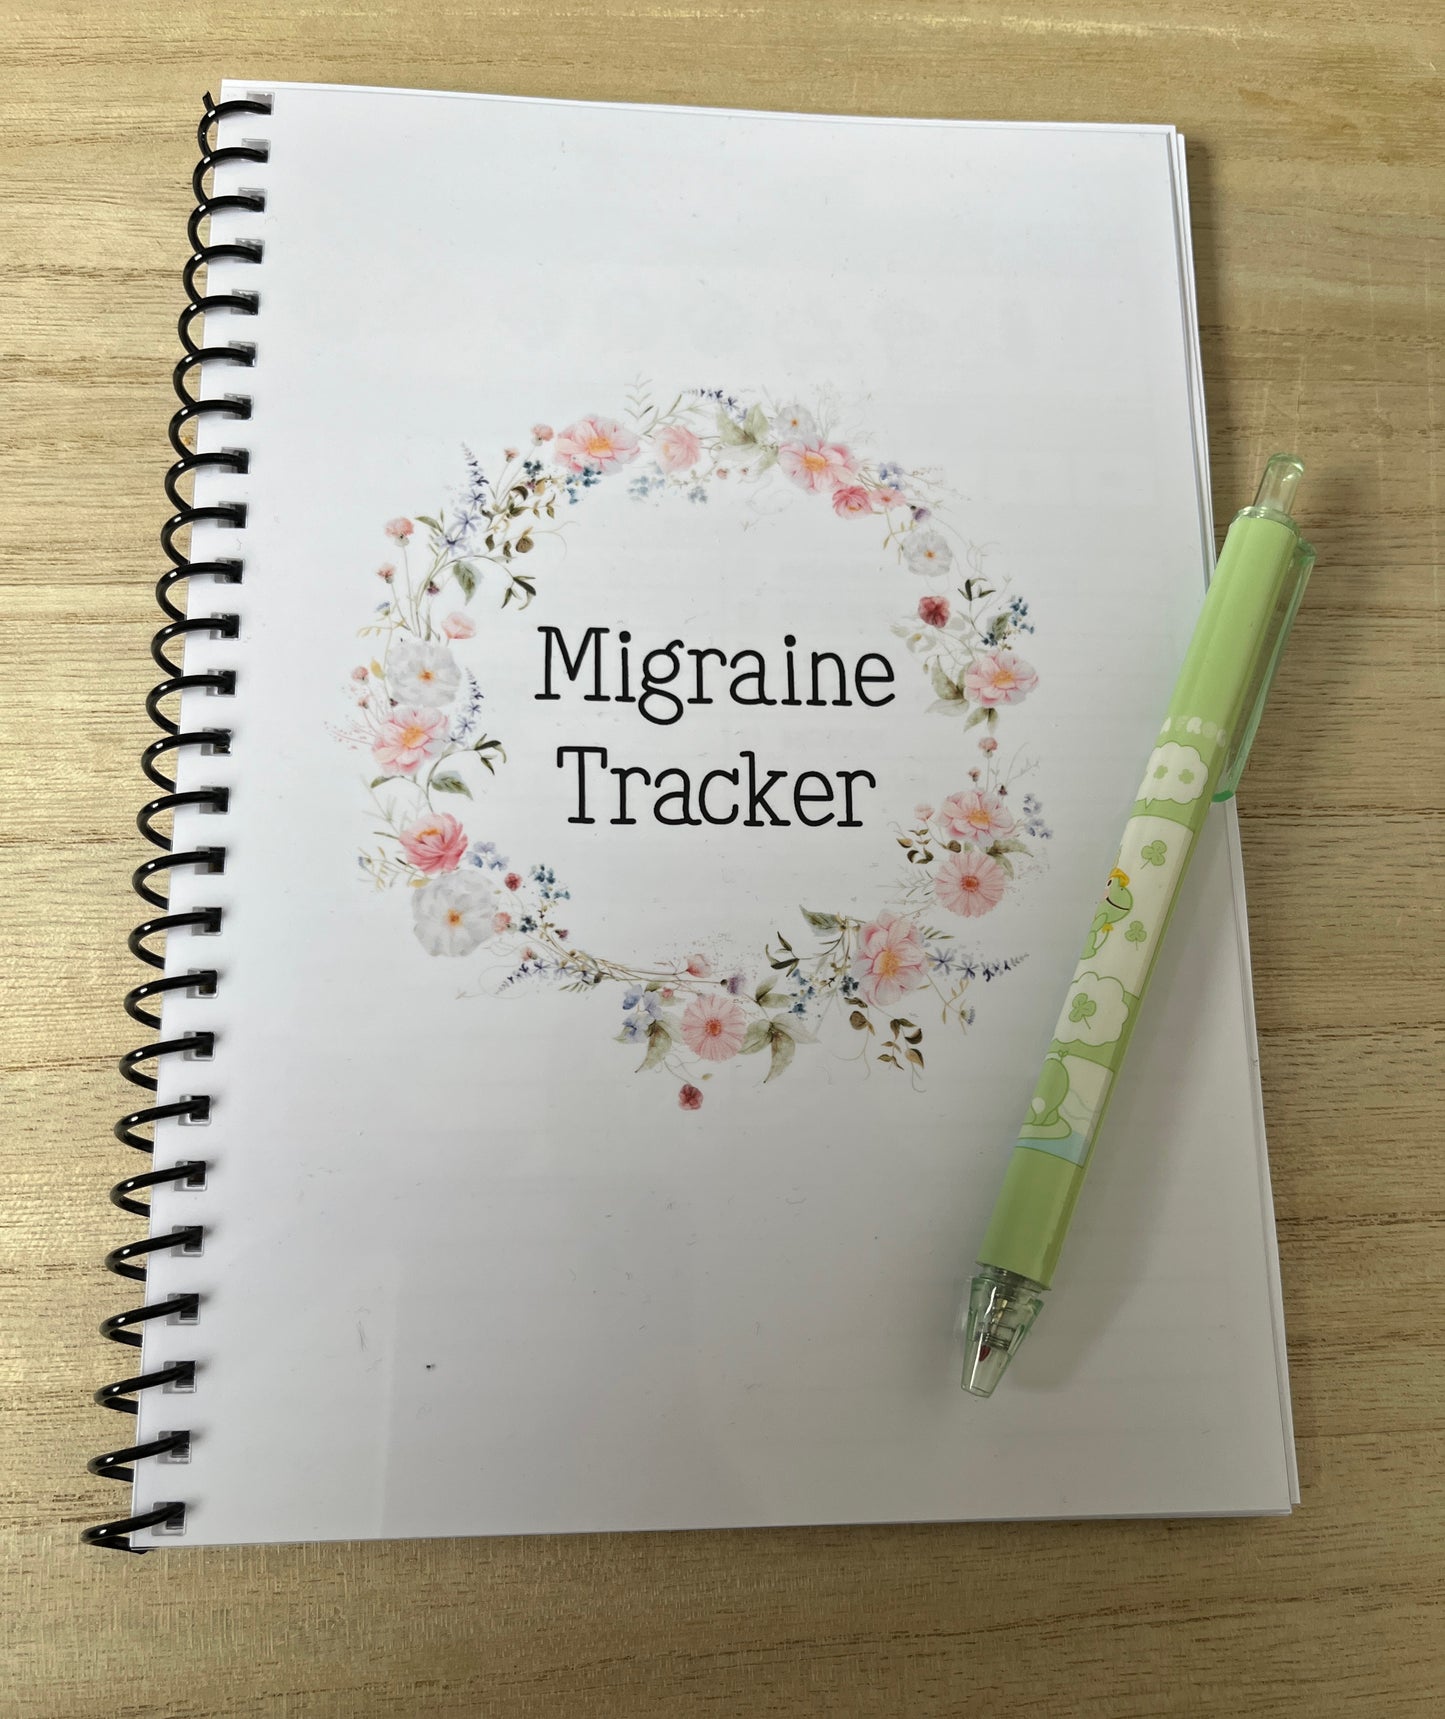 Migraine tracking note book